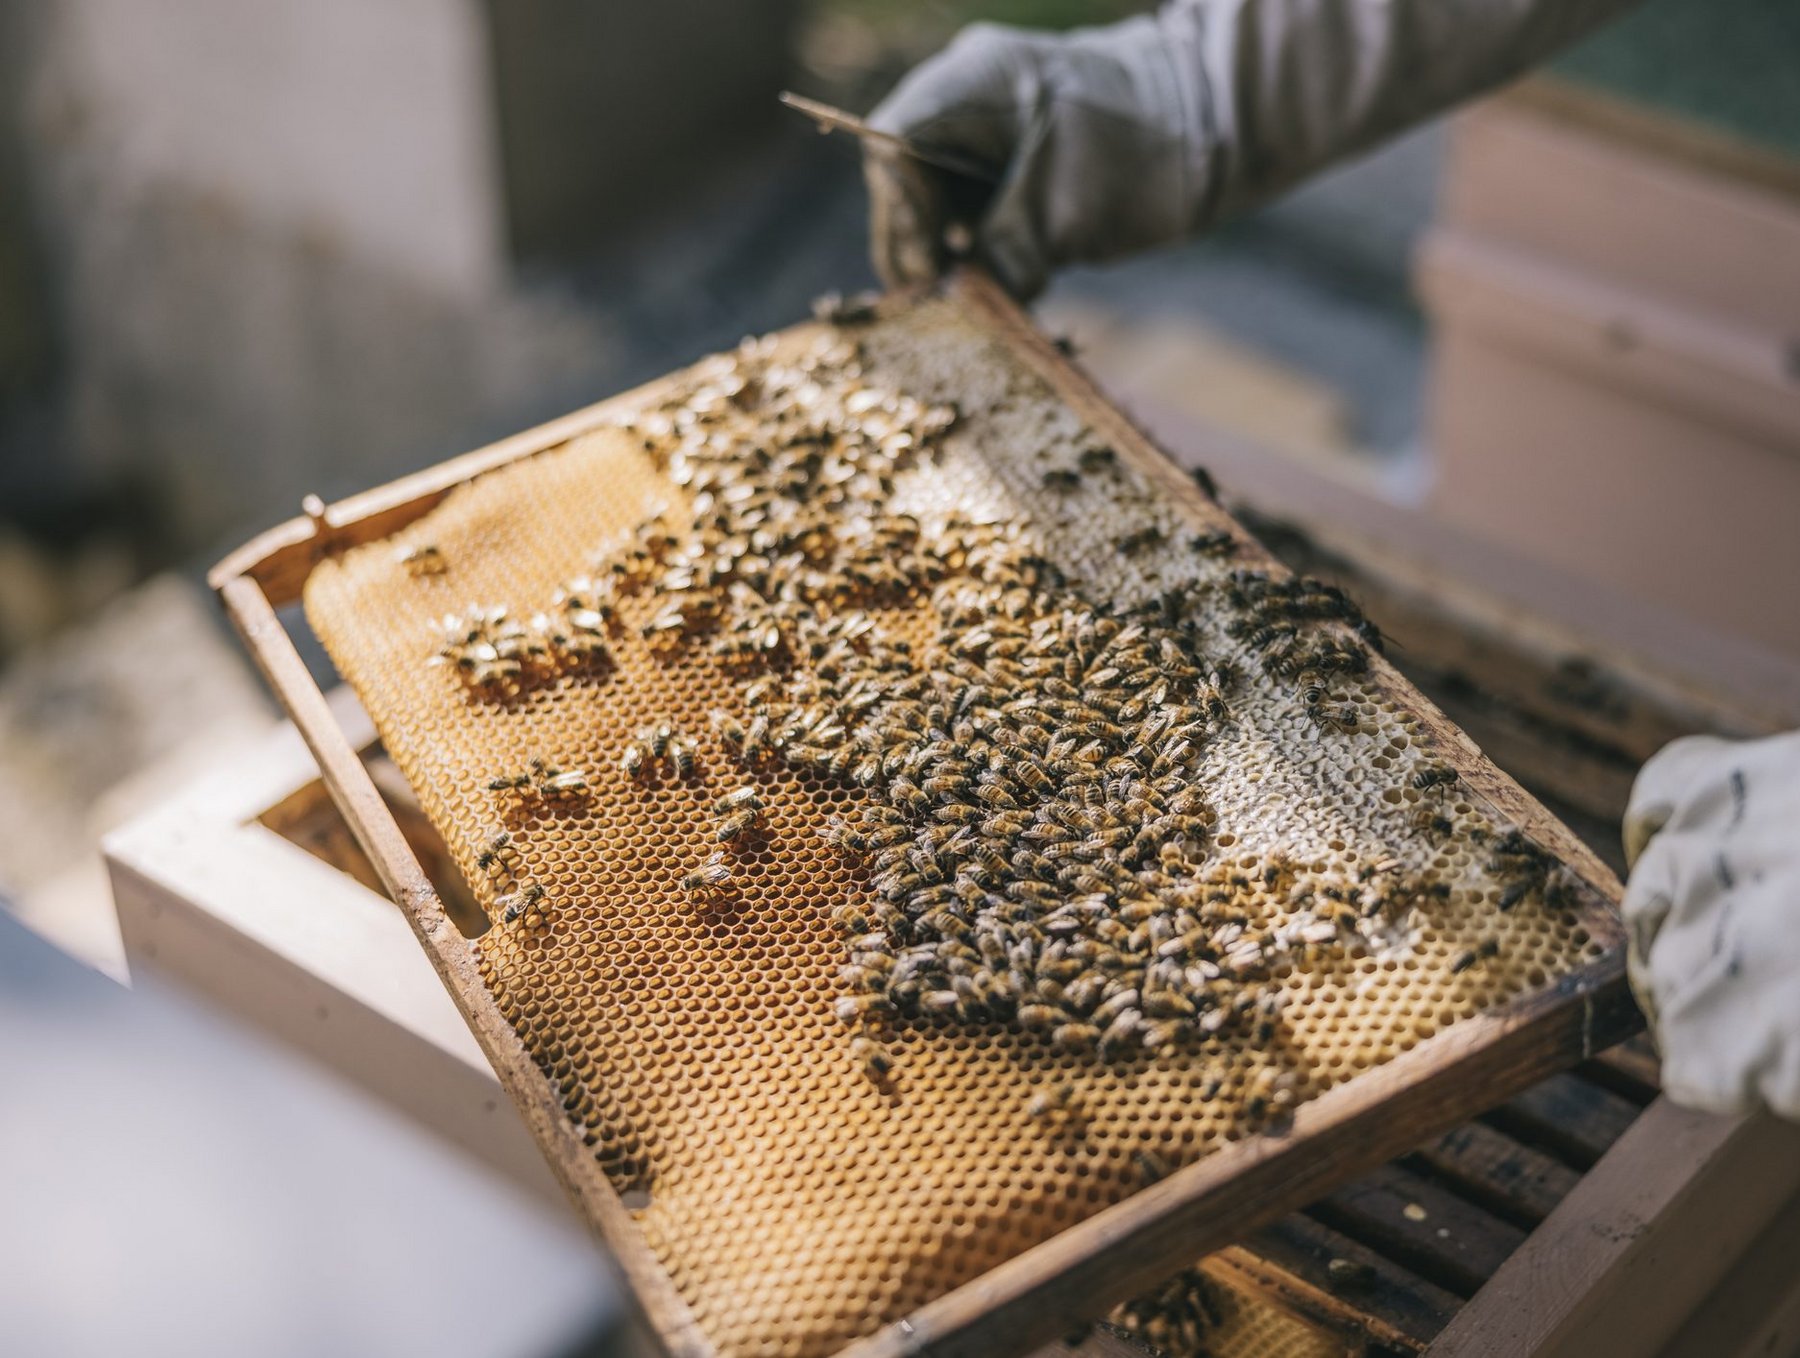 Engineers may learn from bees for optimal honeycomb designs